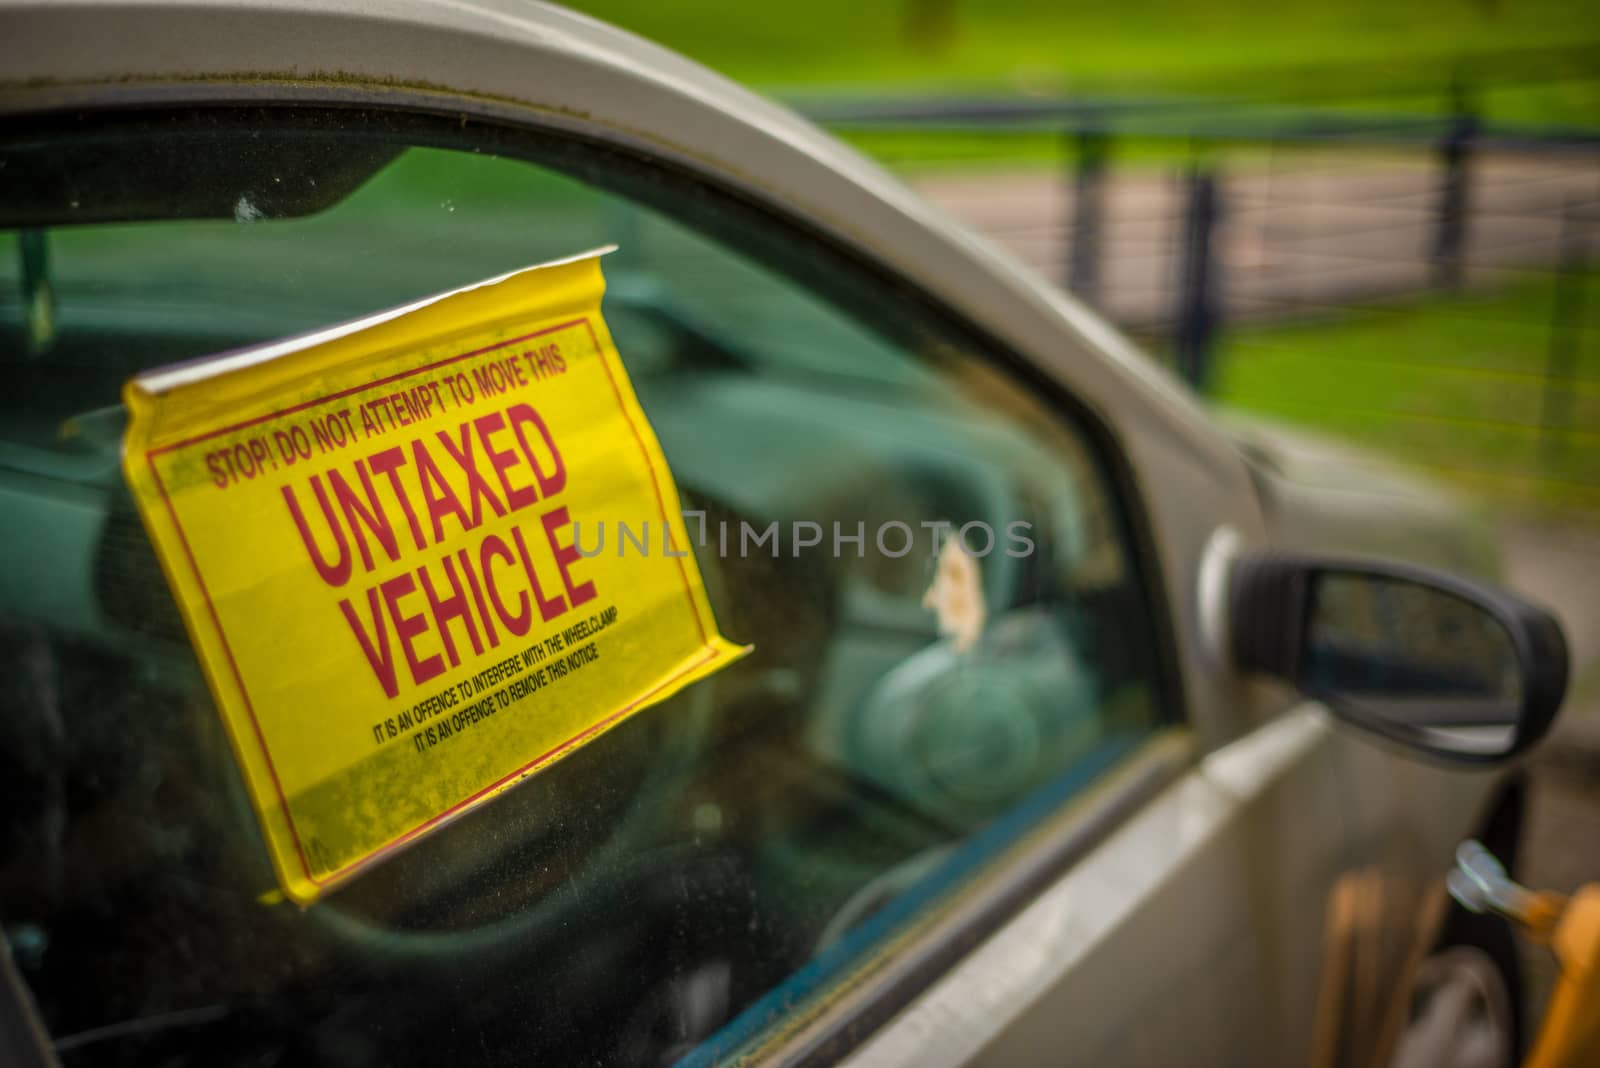 Detail Of A Warning Sign On The Window Of An Untaxed Vehicle With A Clamp On The Front Wheel